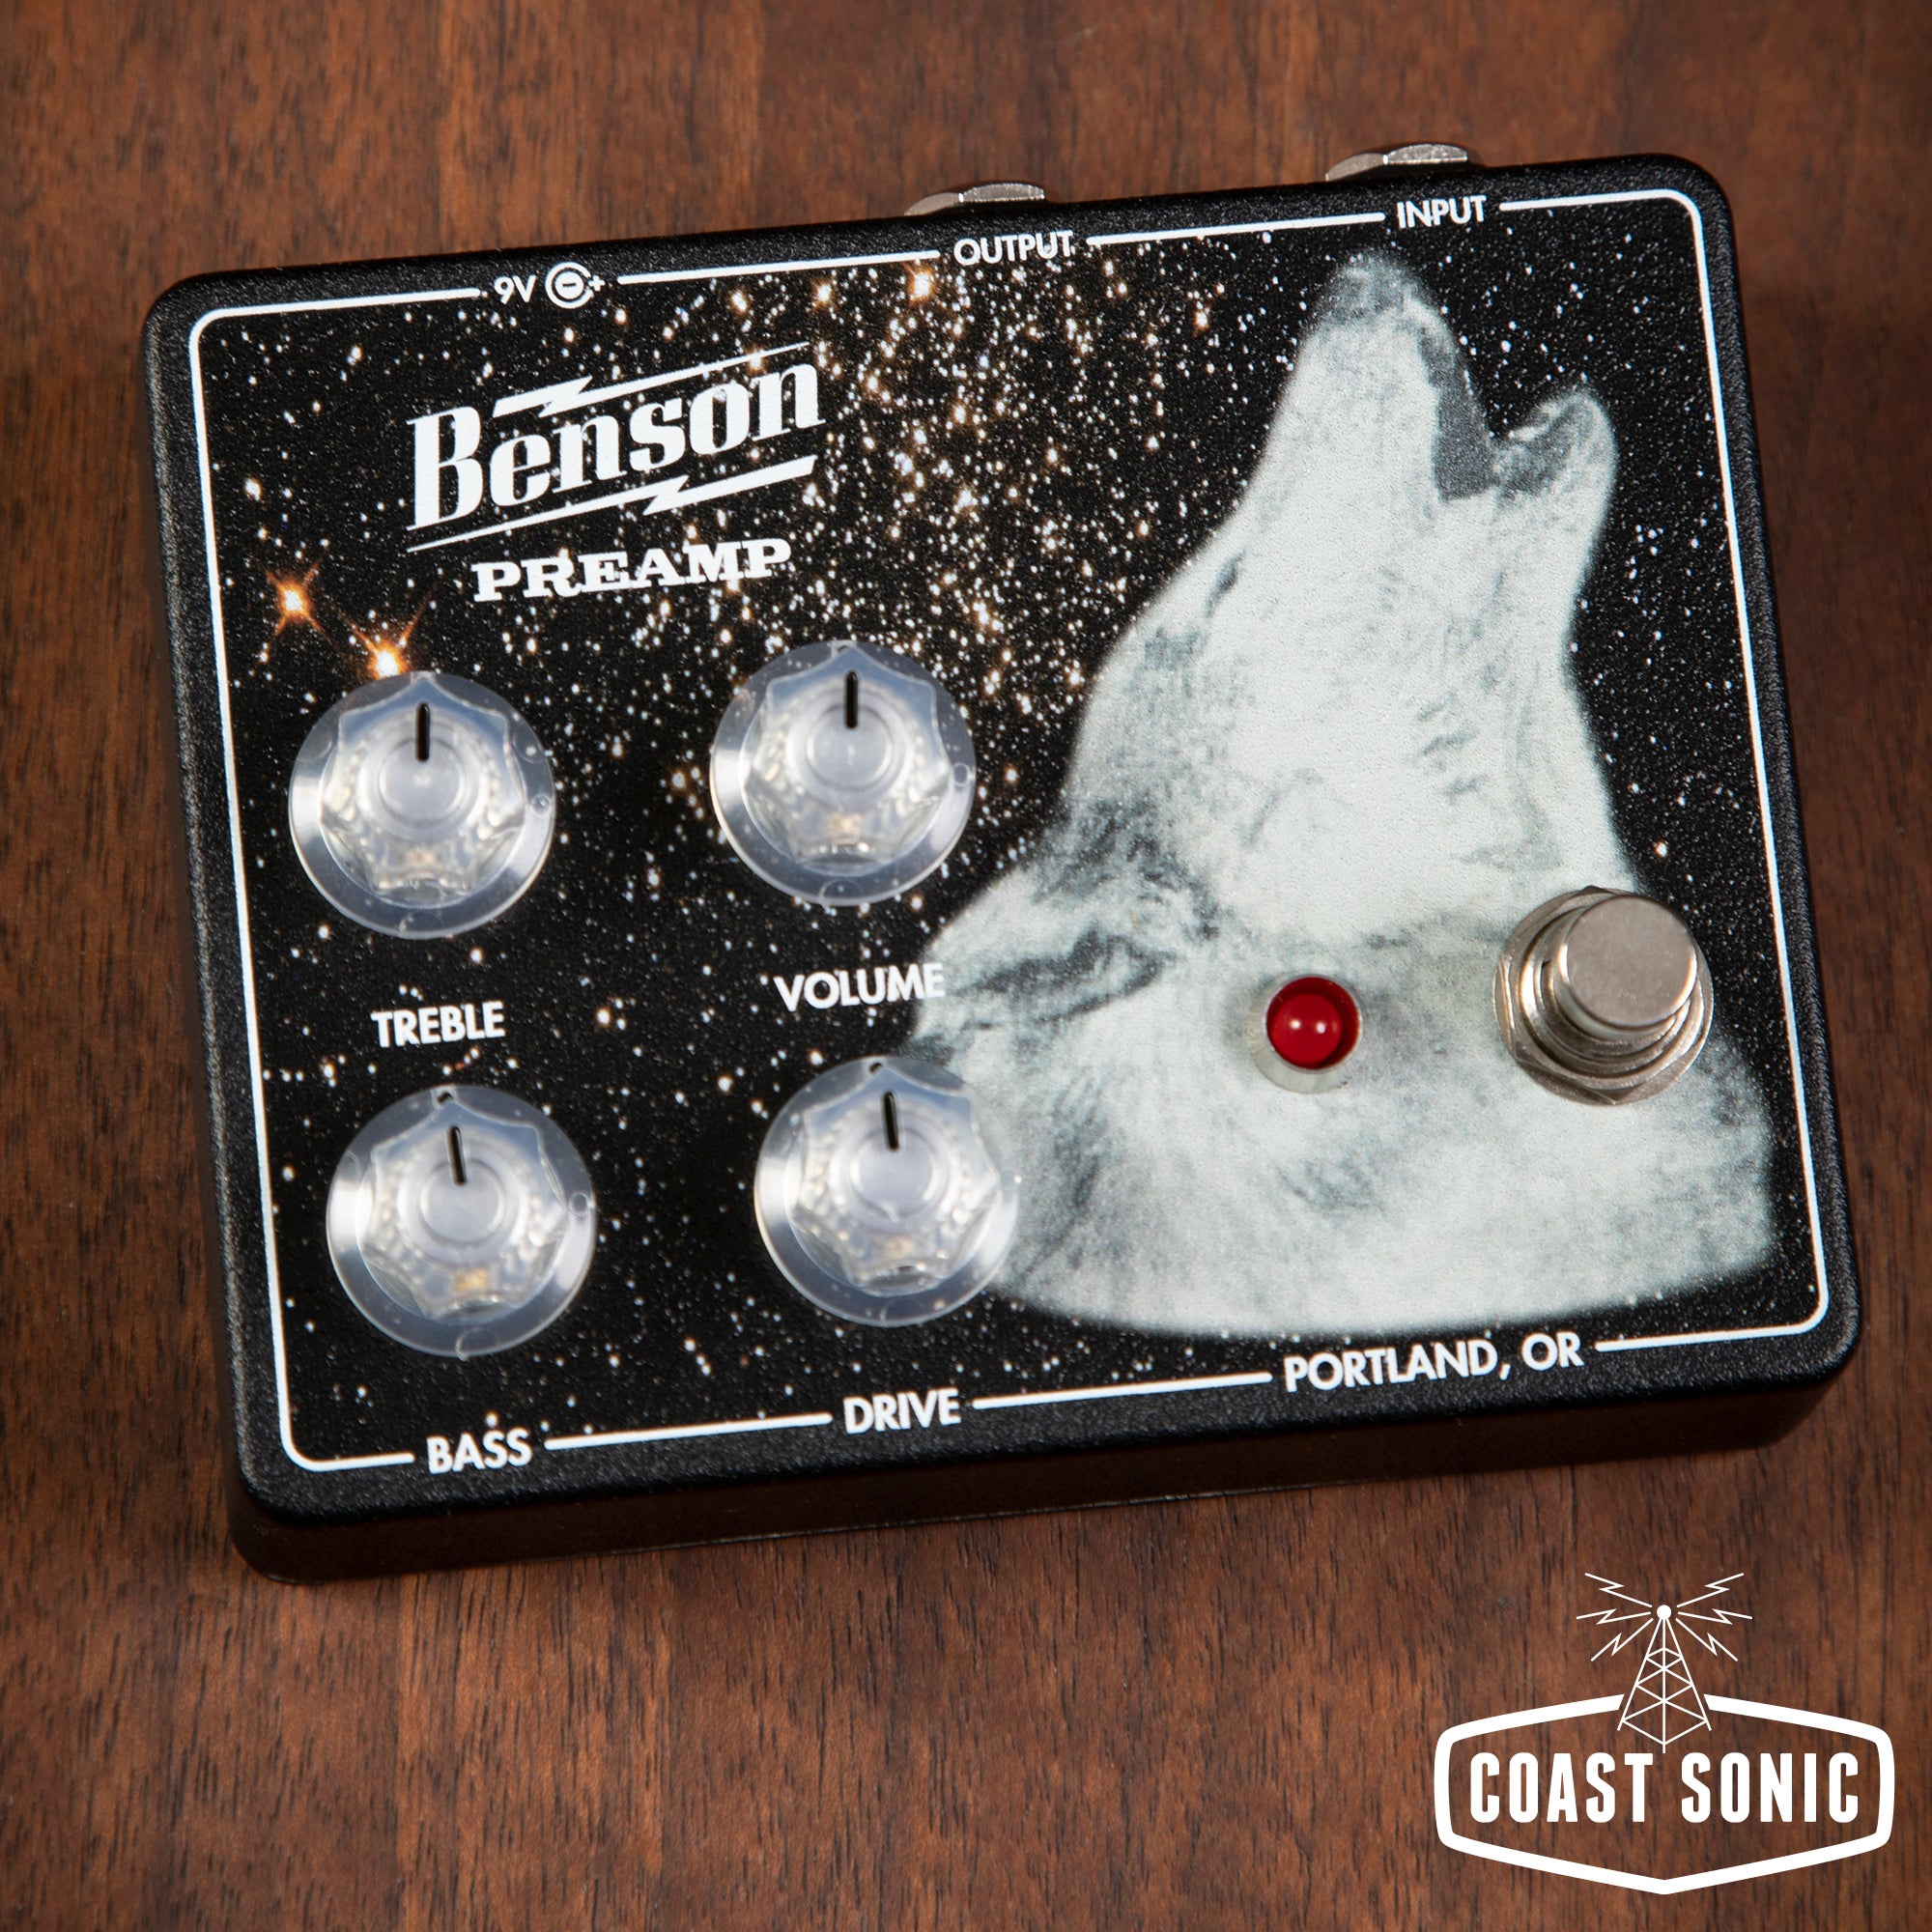 Benson amps／Preamp 日本限定 Limited Edition